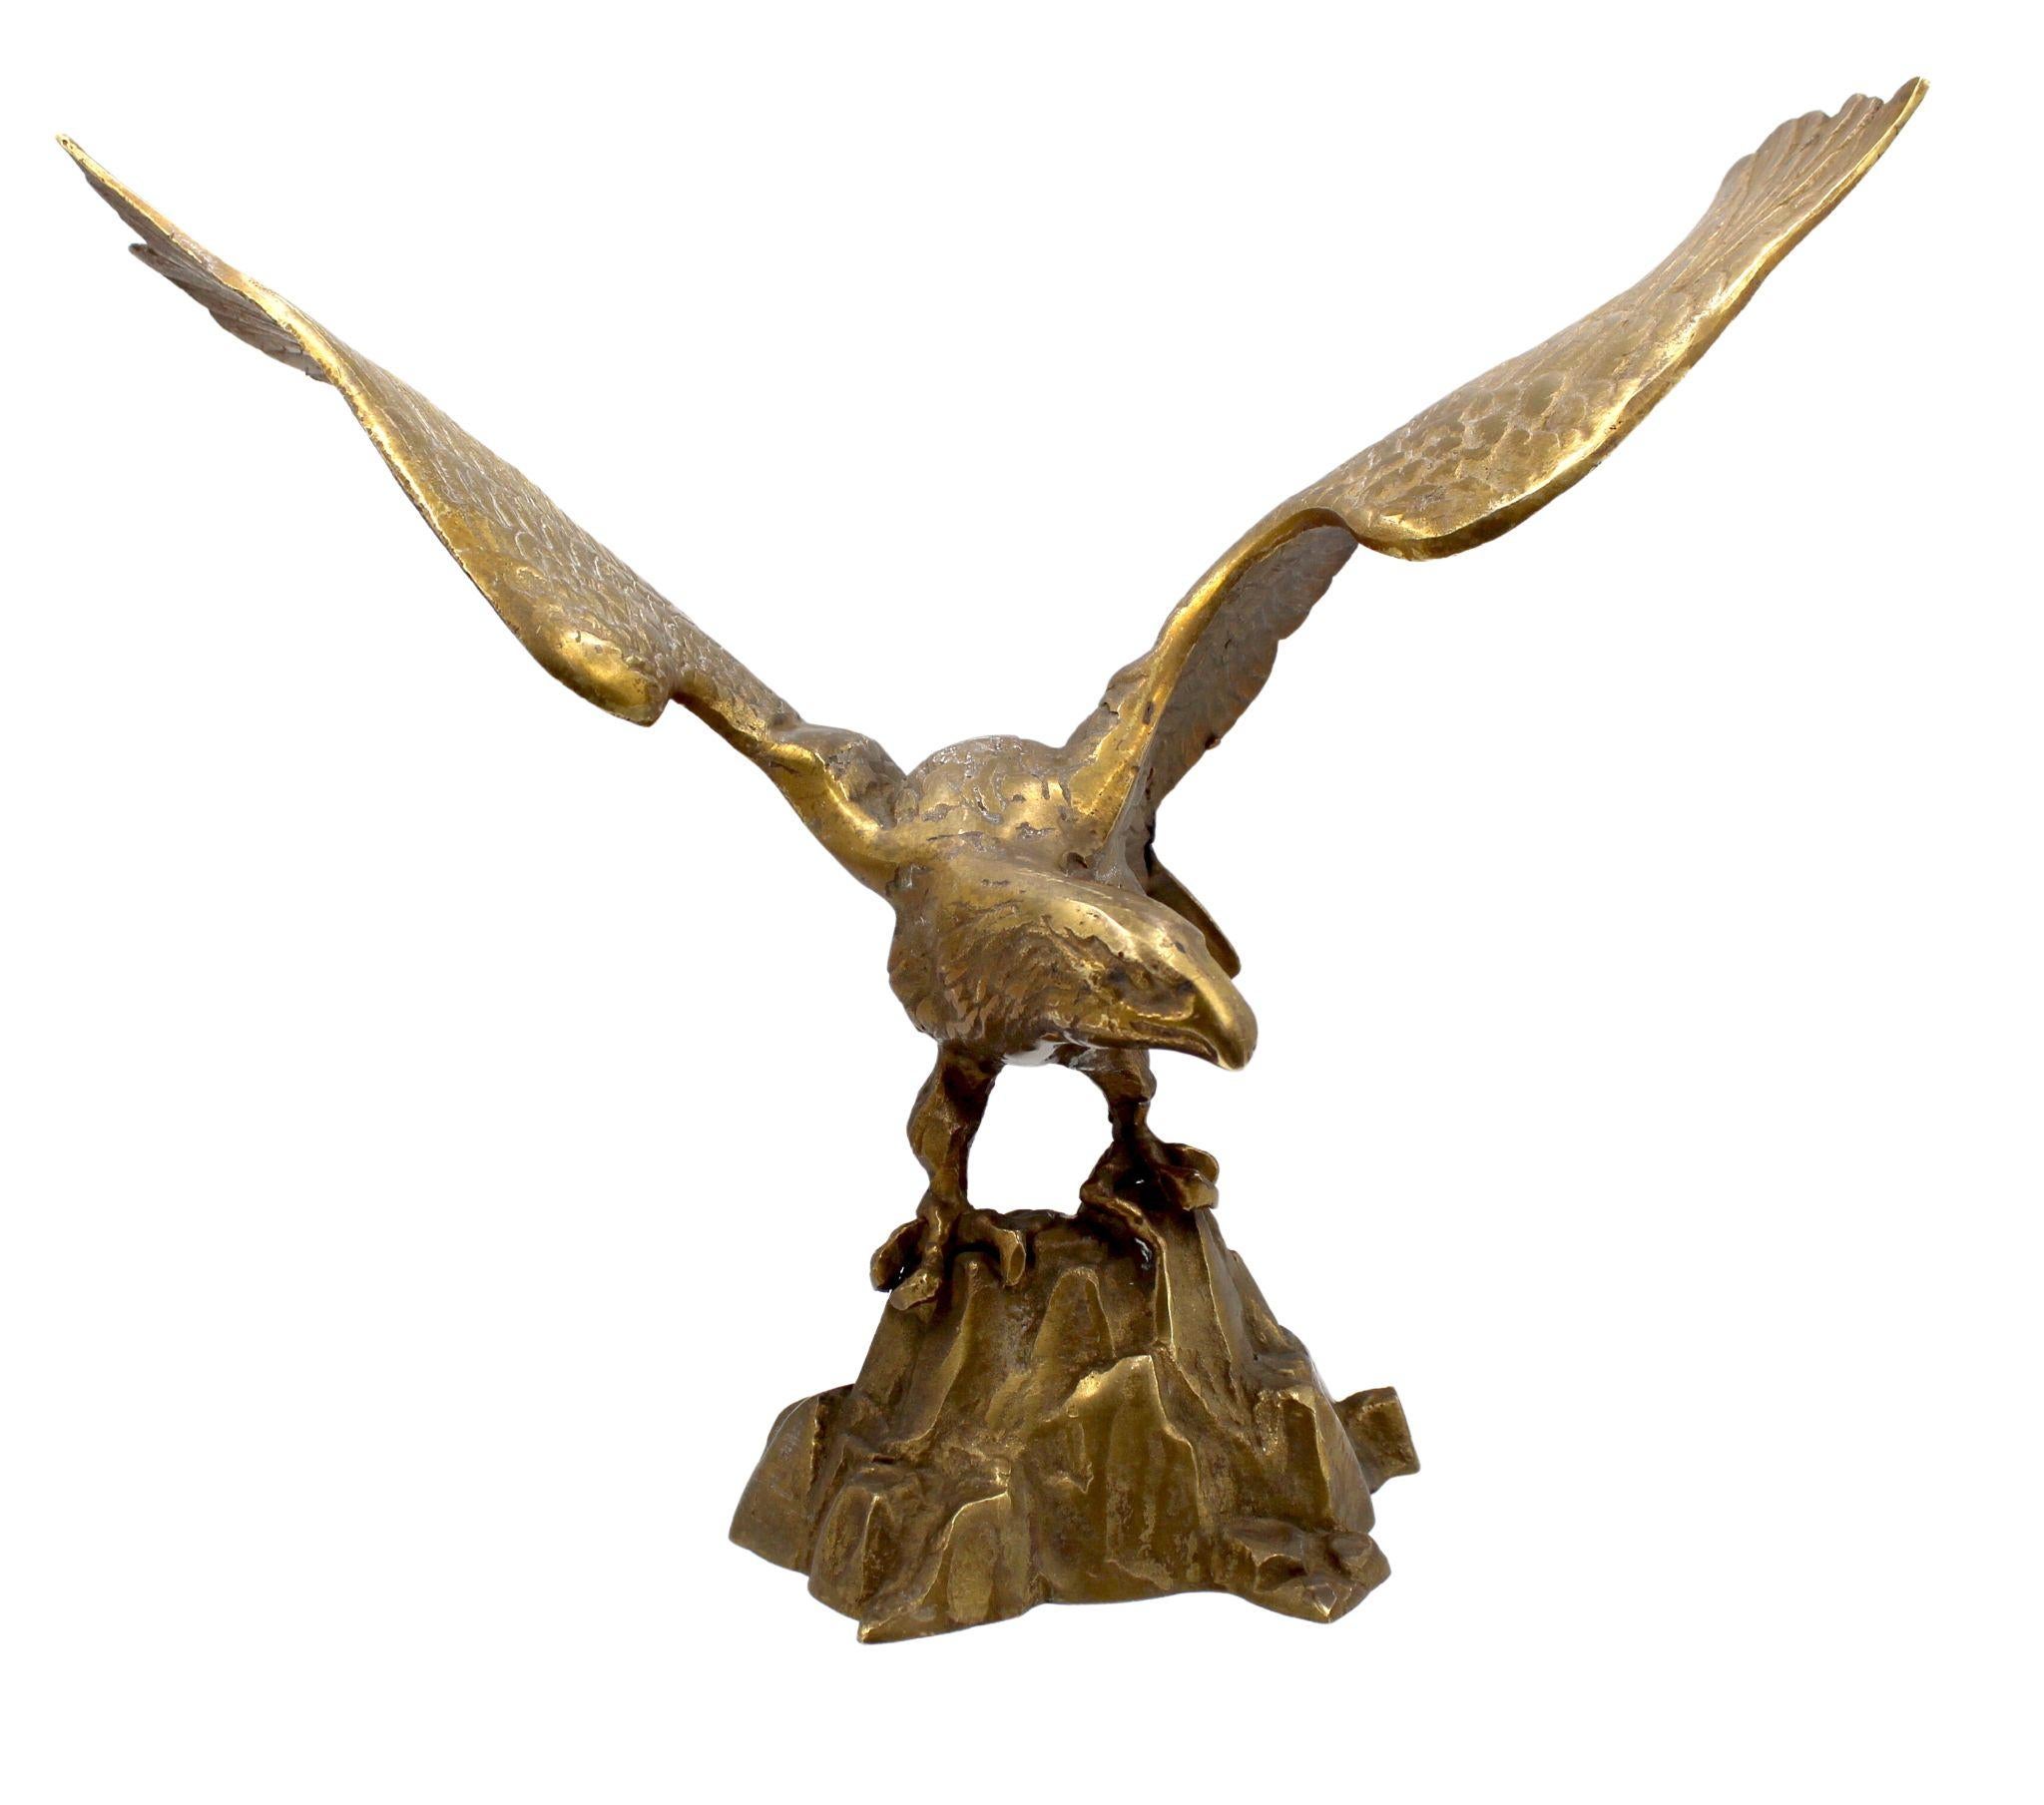 Presented is a vintage brass sculpture of a bald eagle on rocks. Made in America in the early 1960s, this sculpture features a large-scale, realistically cast bald eagle. The eagle has both of its wings spread wide for take-off, as his talons grip a